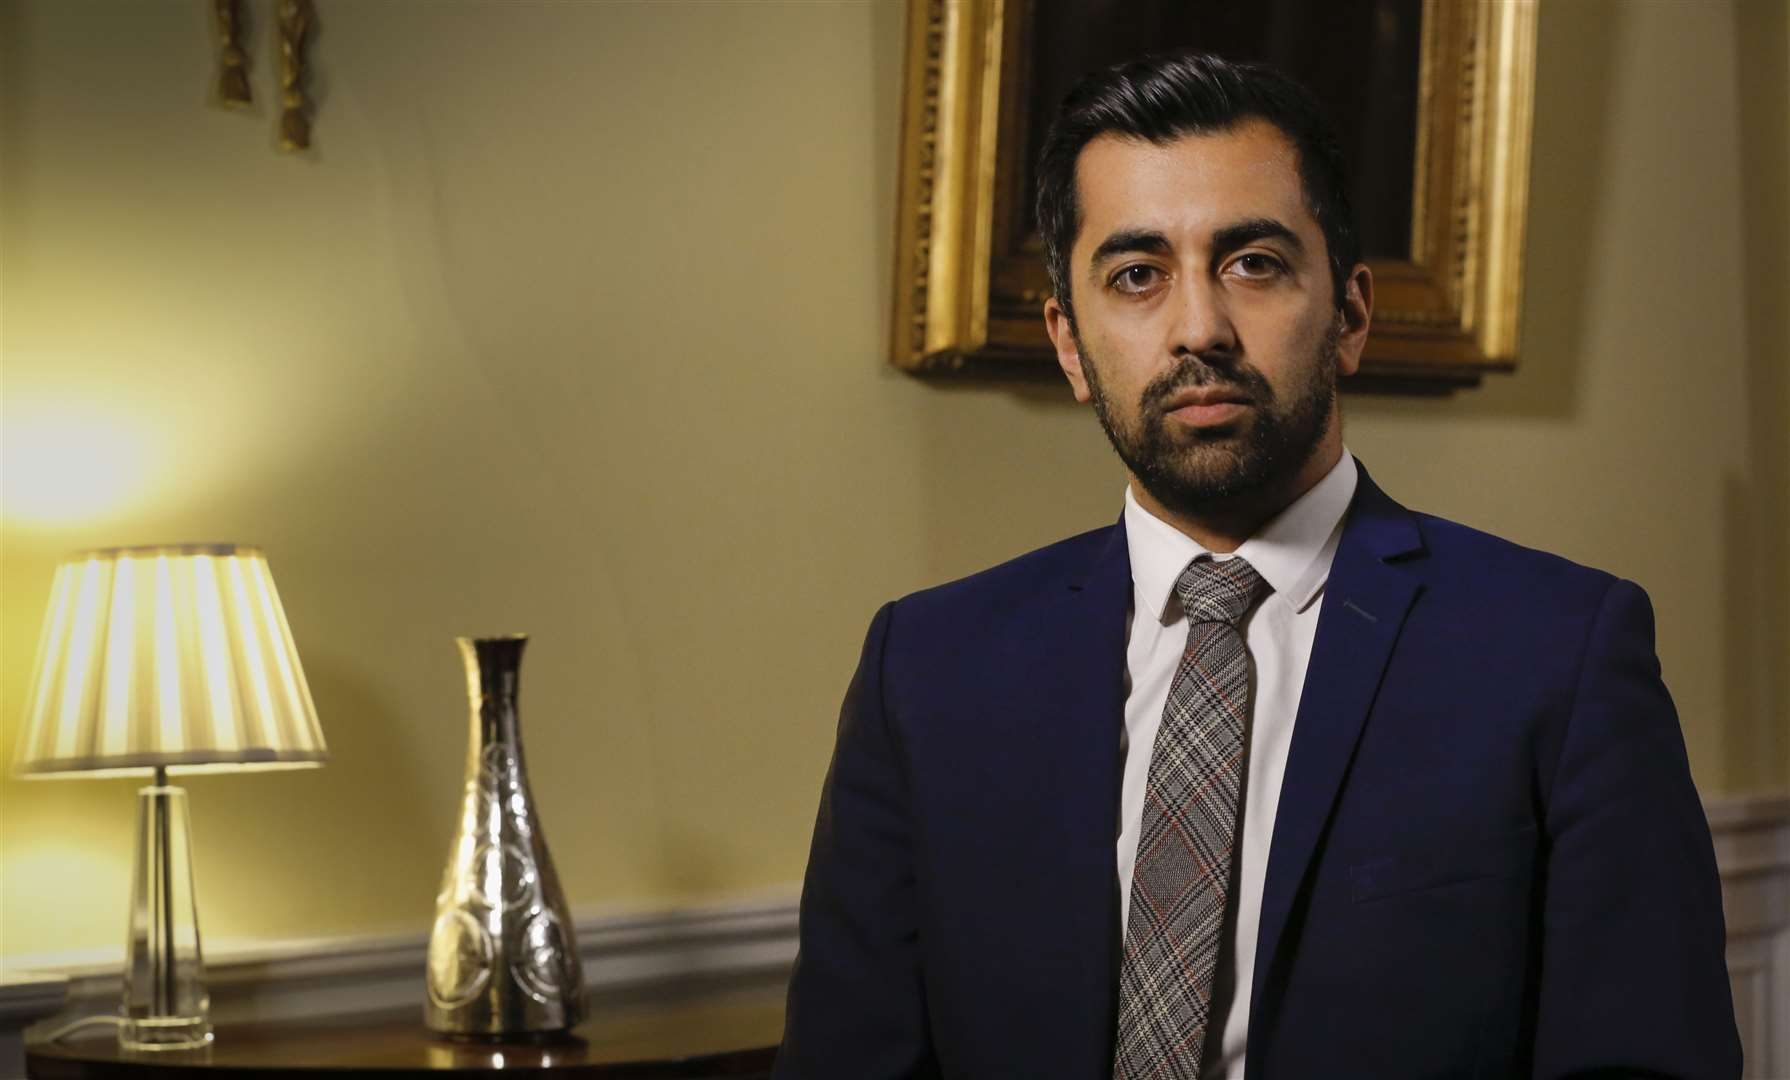 Health Secretary Humza Yousaf had to cancel his planned visit to Moray due to concerns around Covid-19.